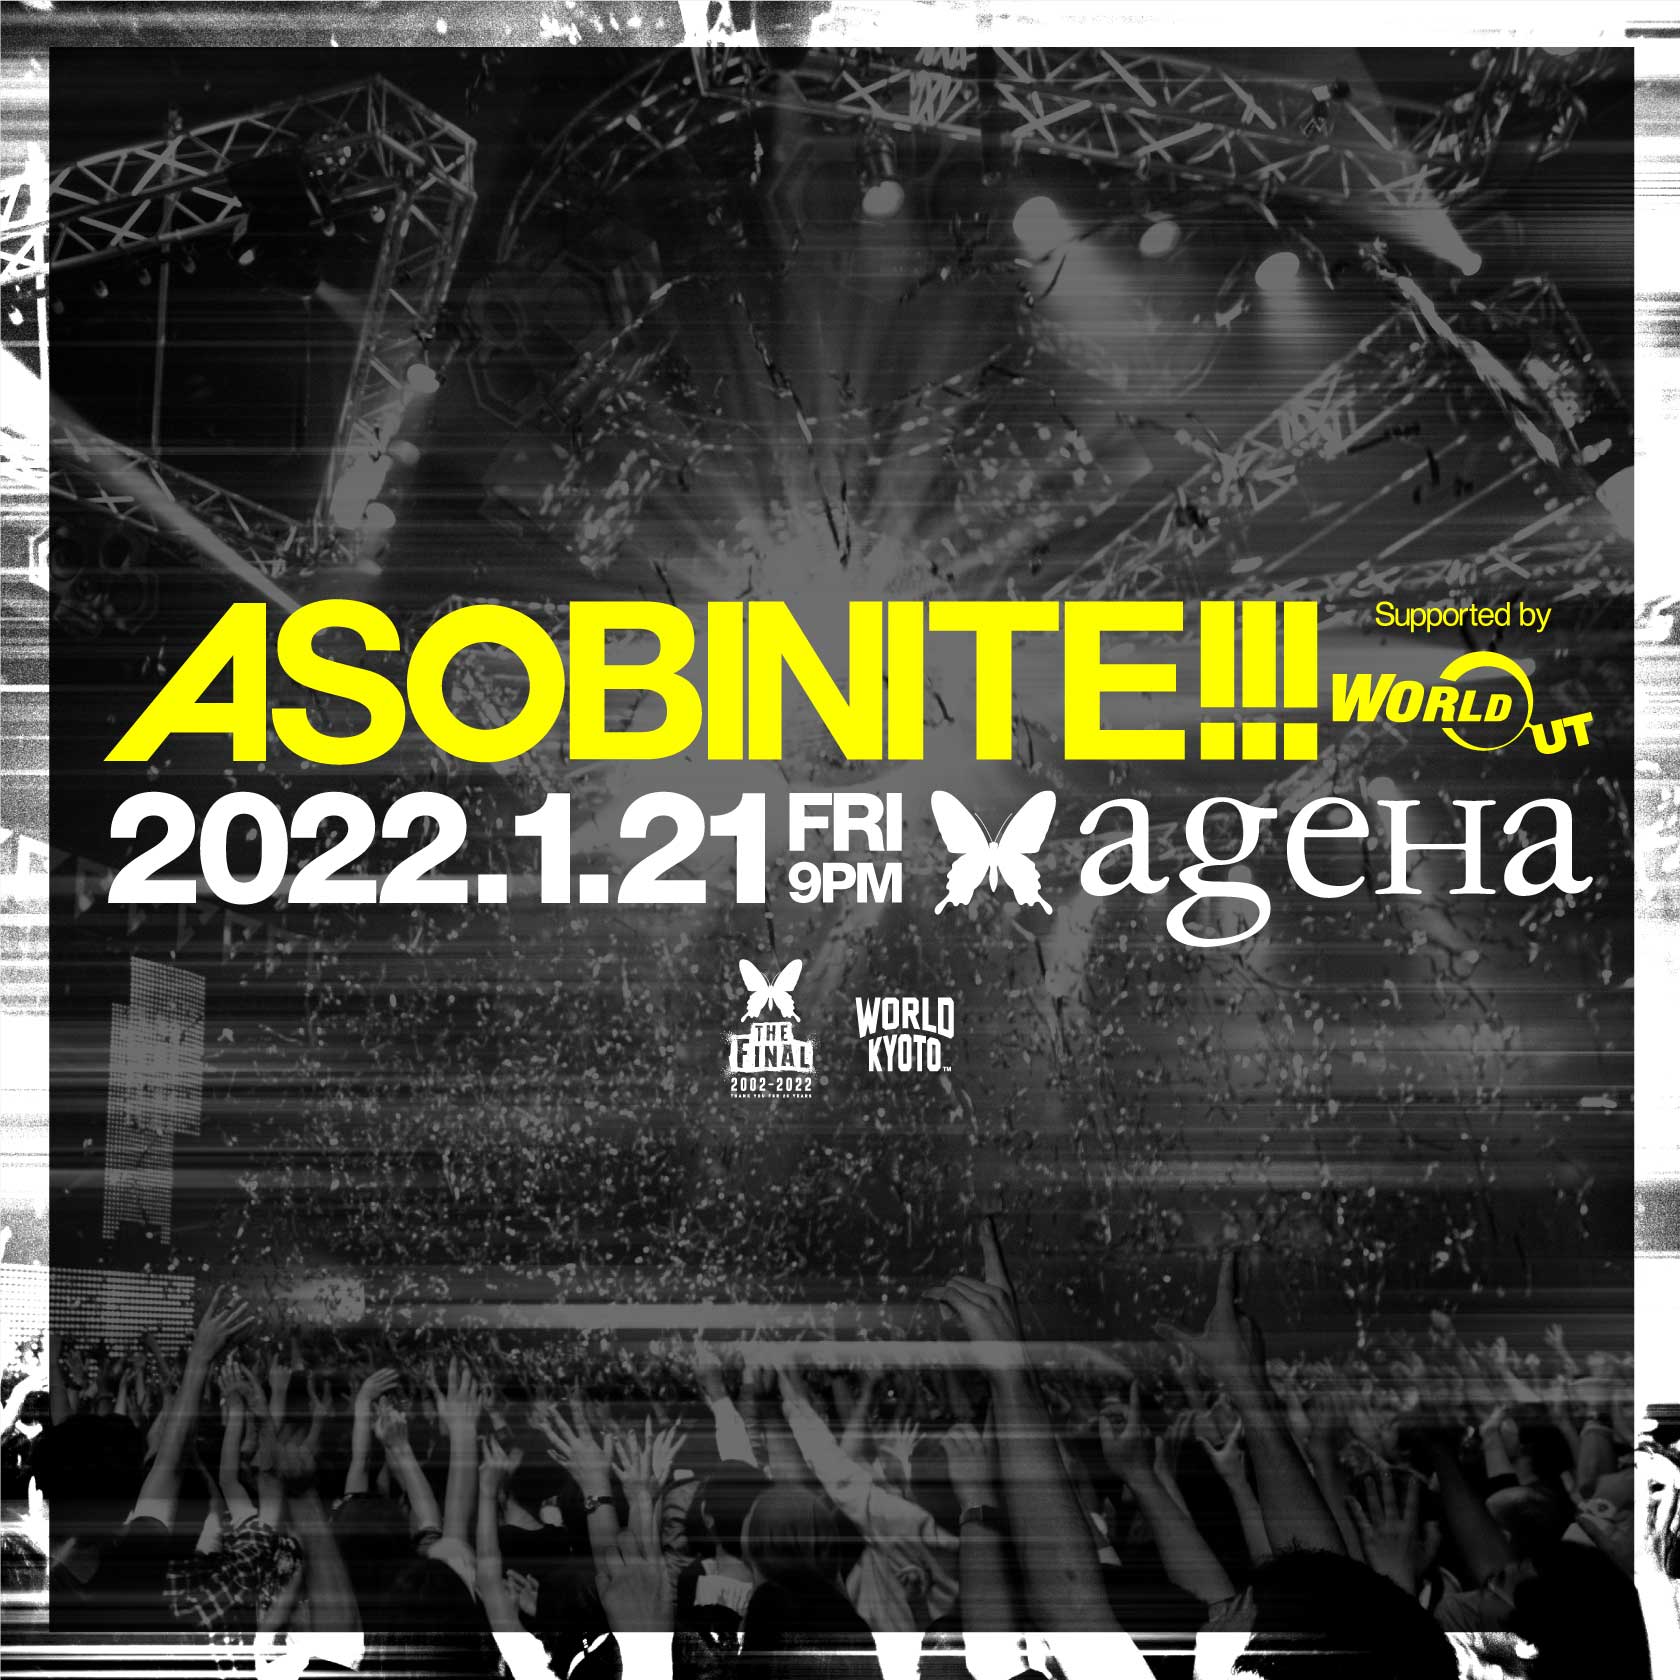 ASOBINITE!!! Supported by WORLDOUT